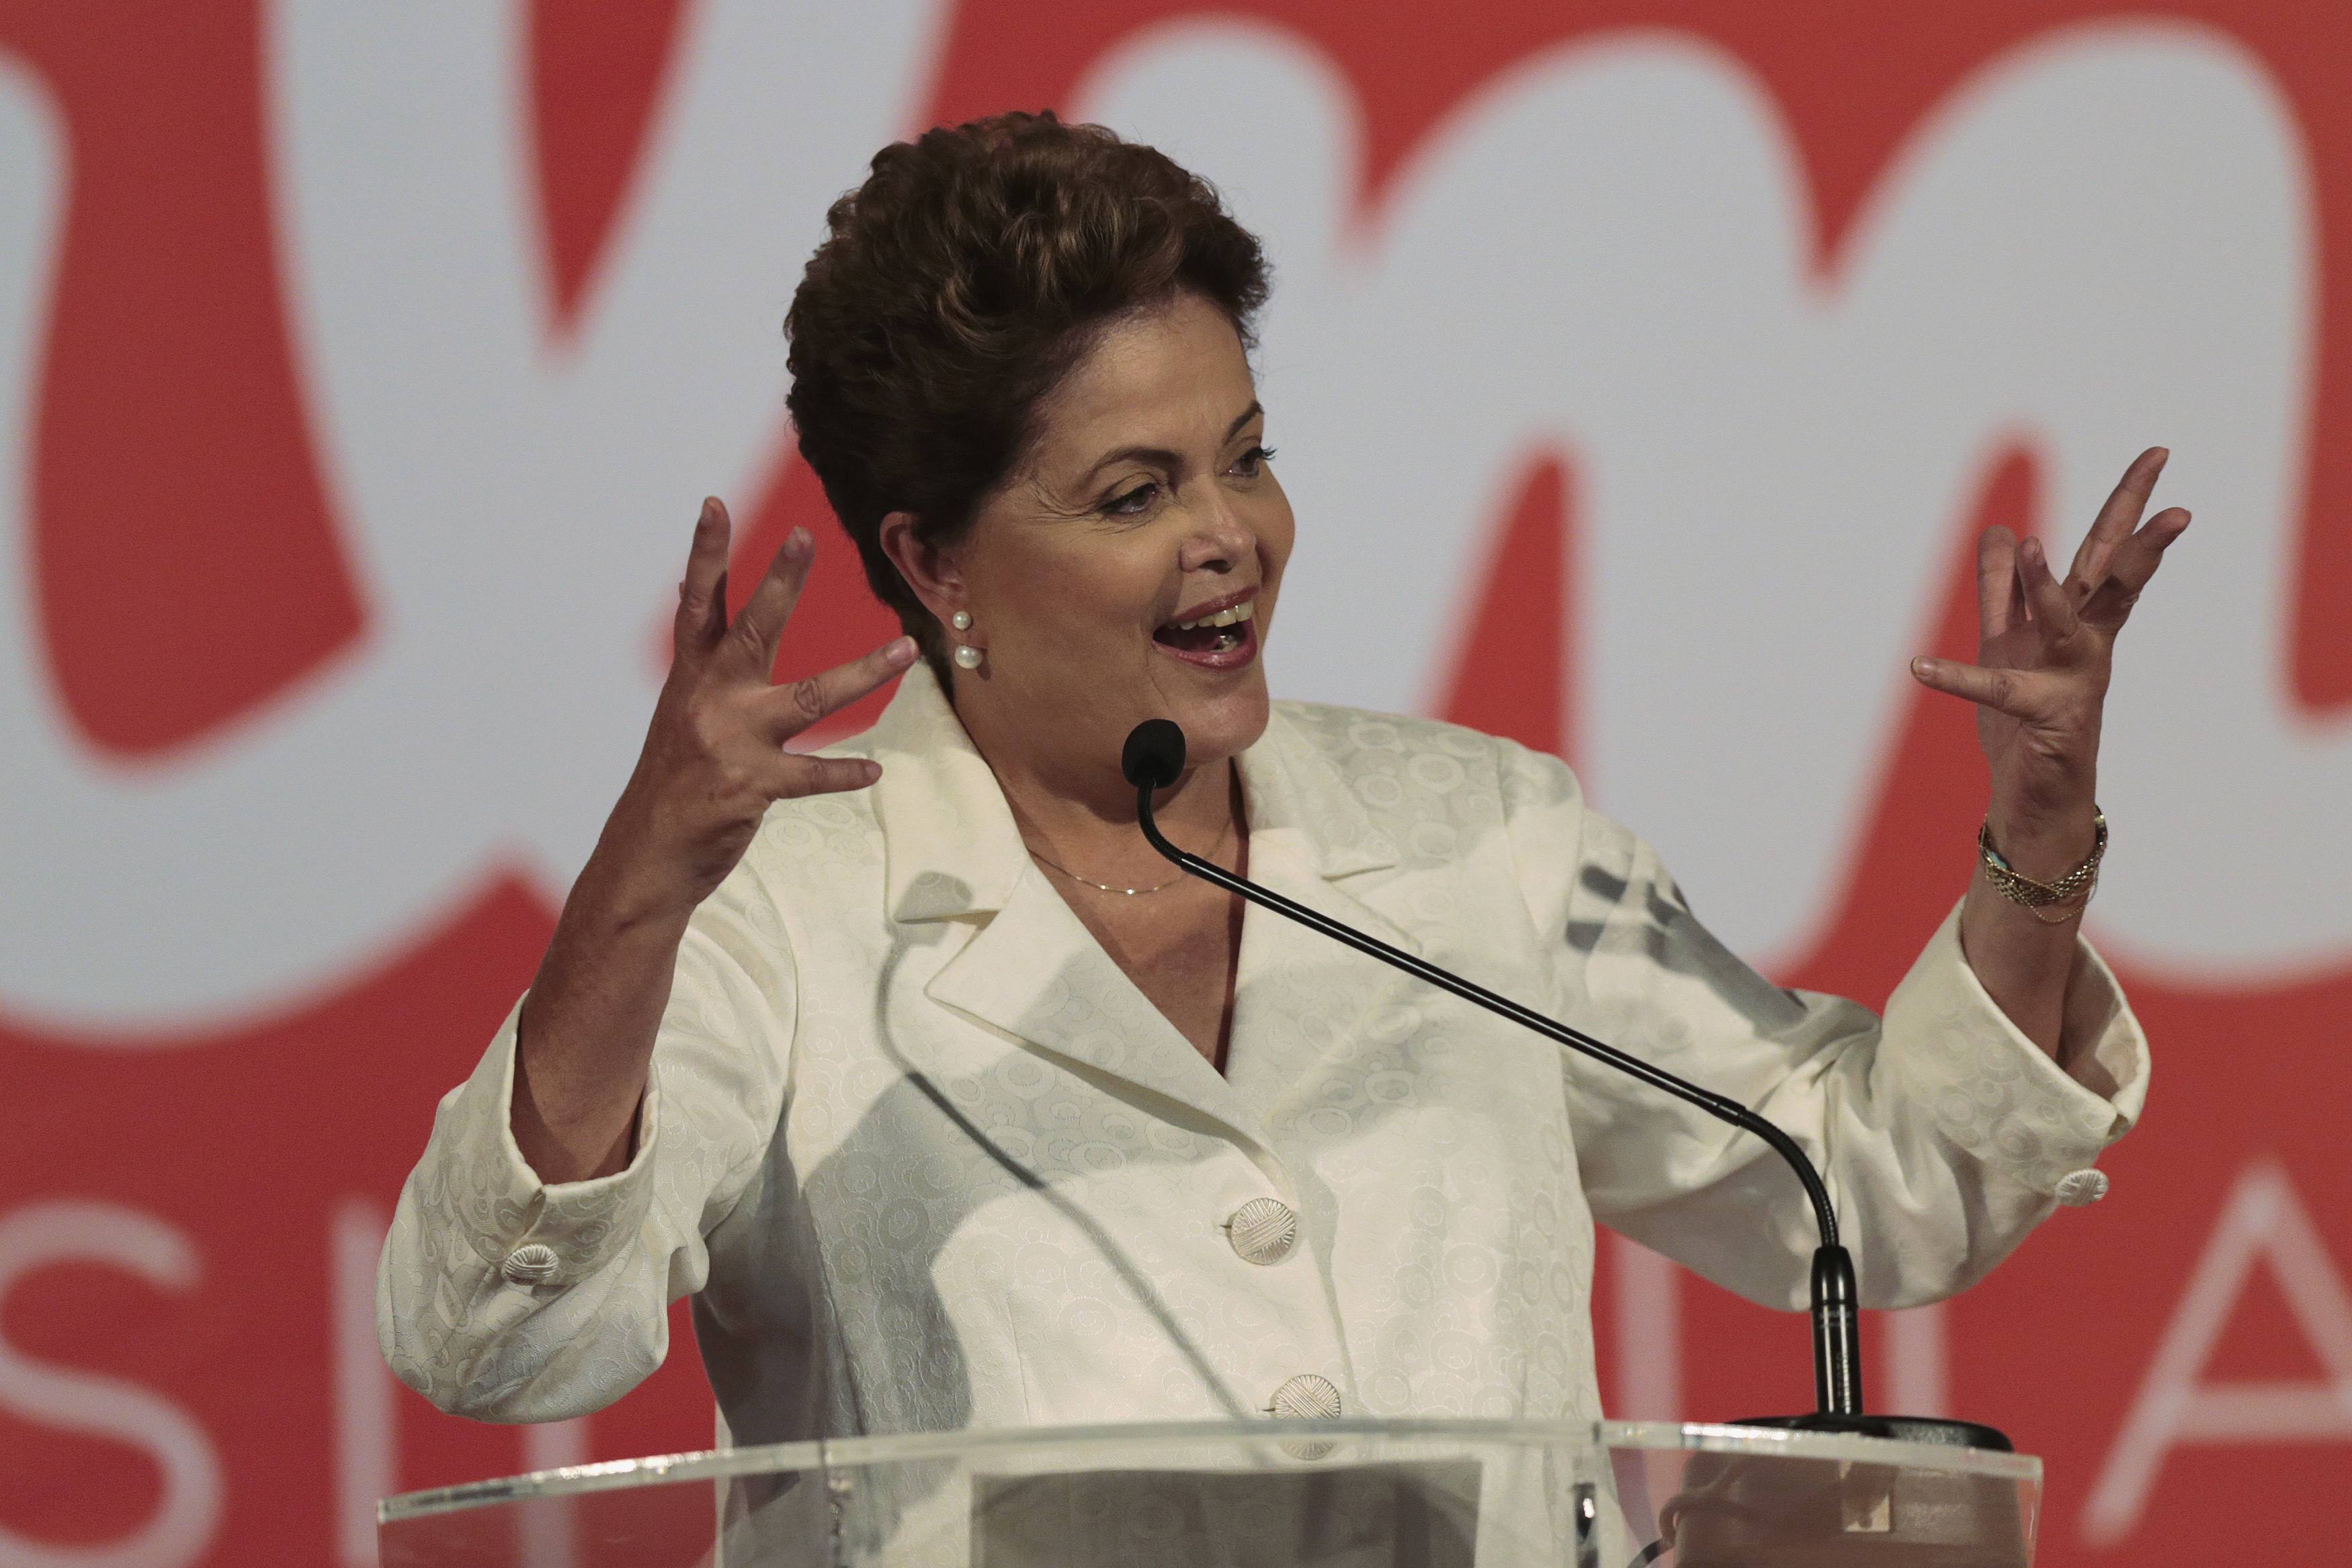 Brazil's Rousseff to face pro-business Neves in election runoff